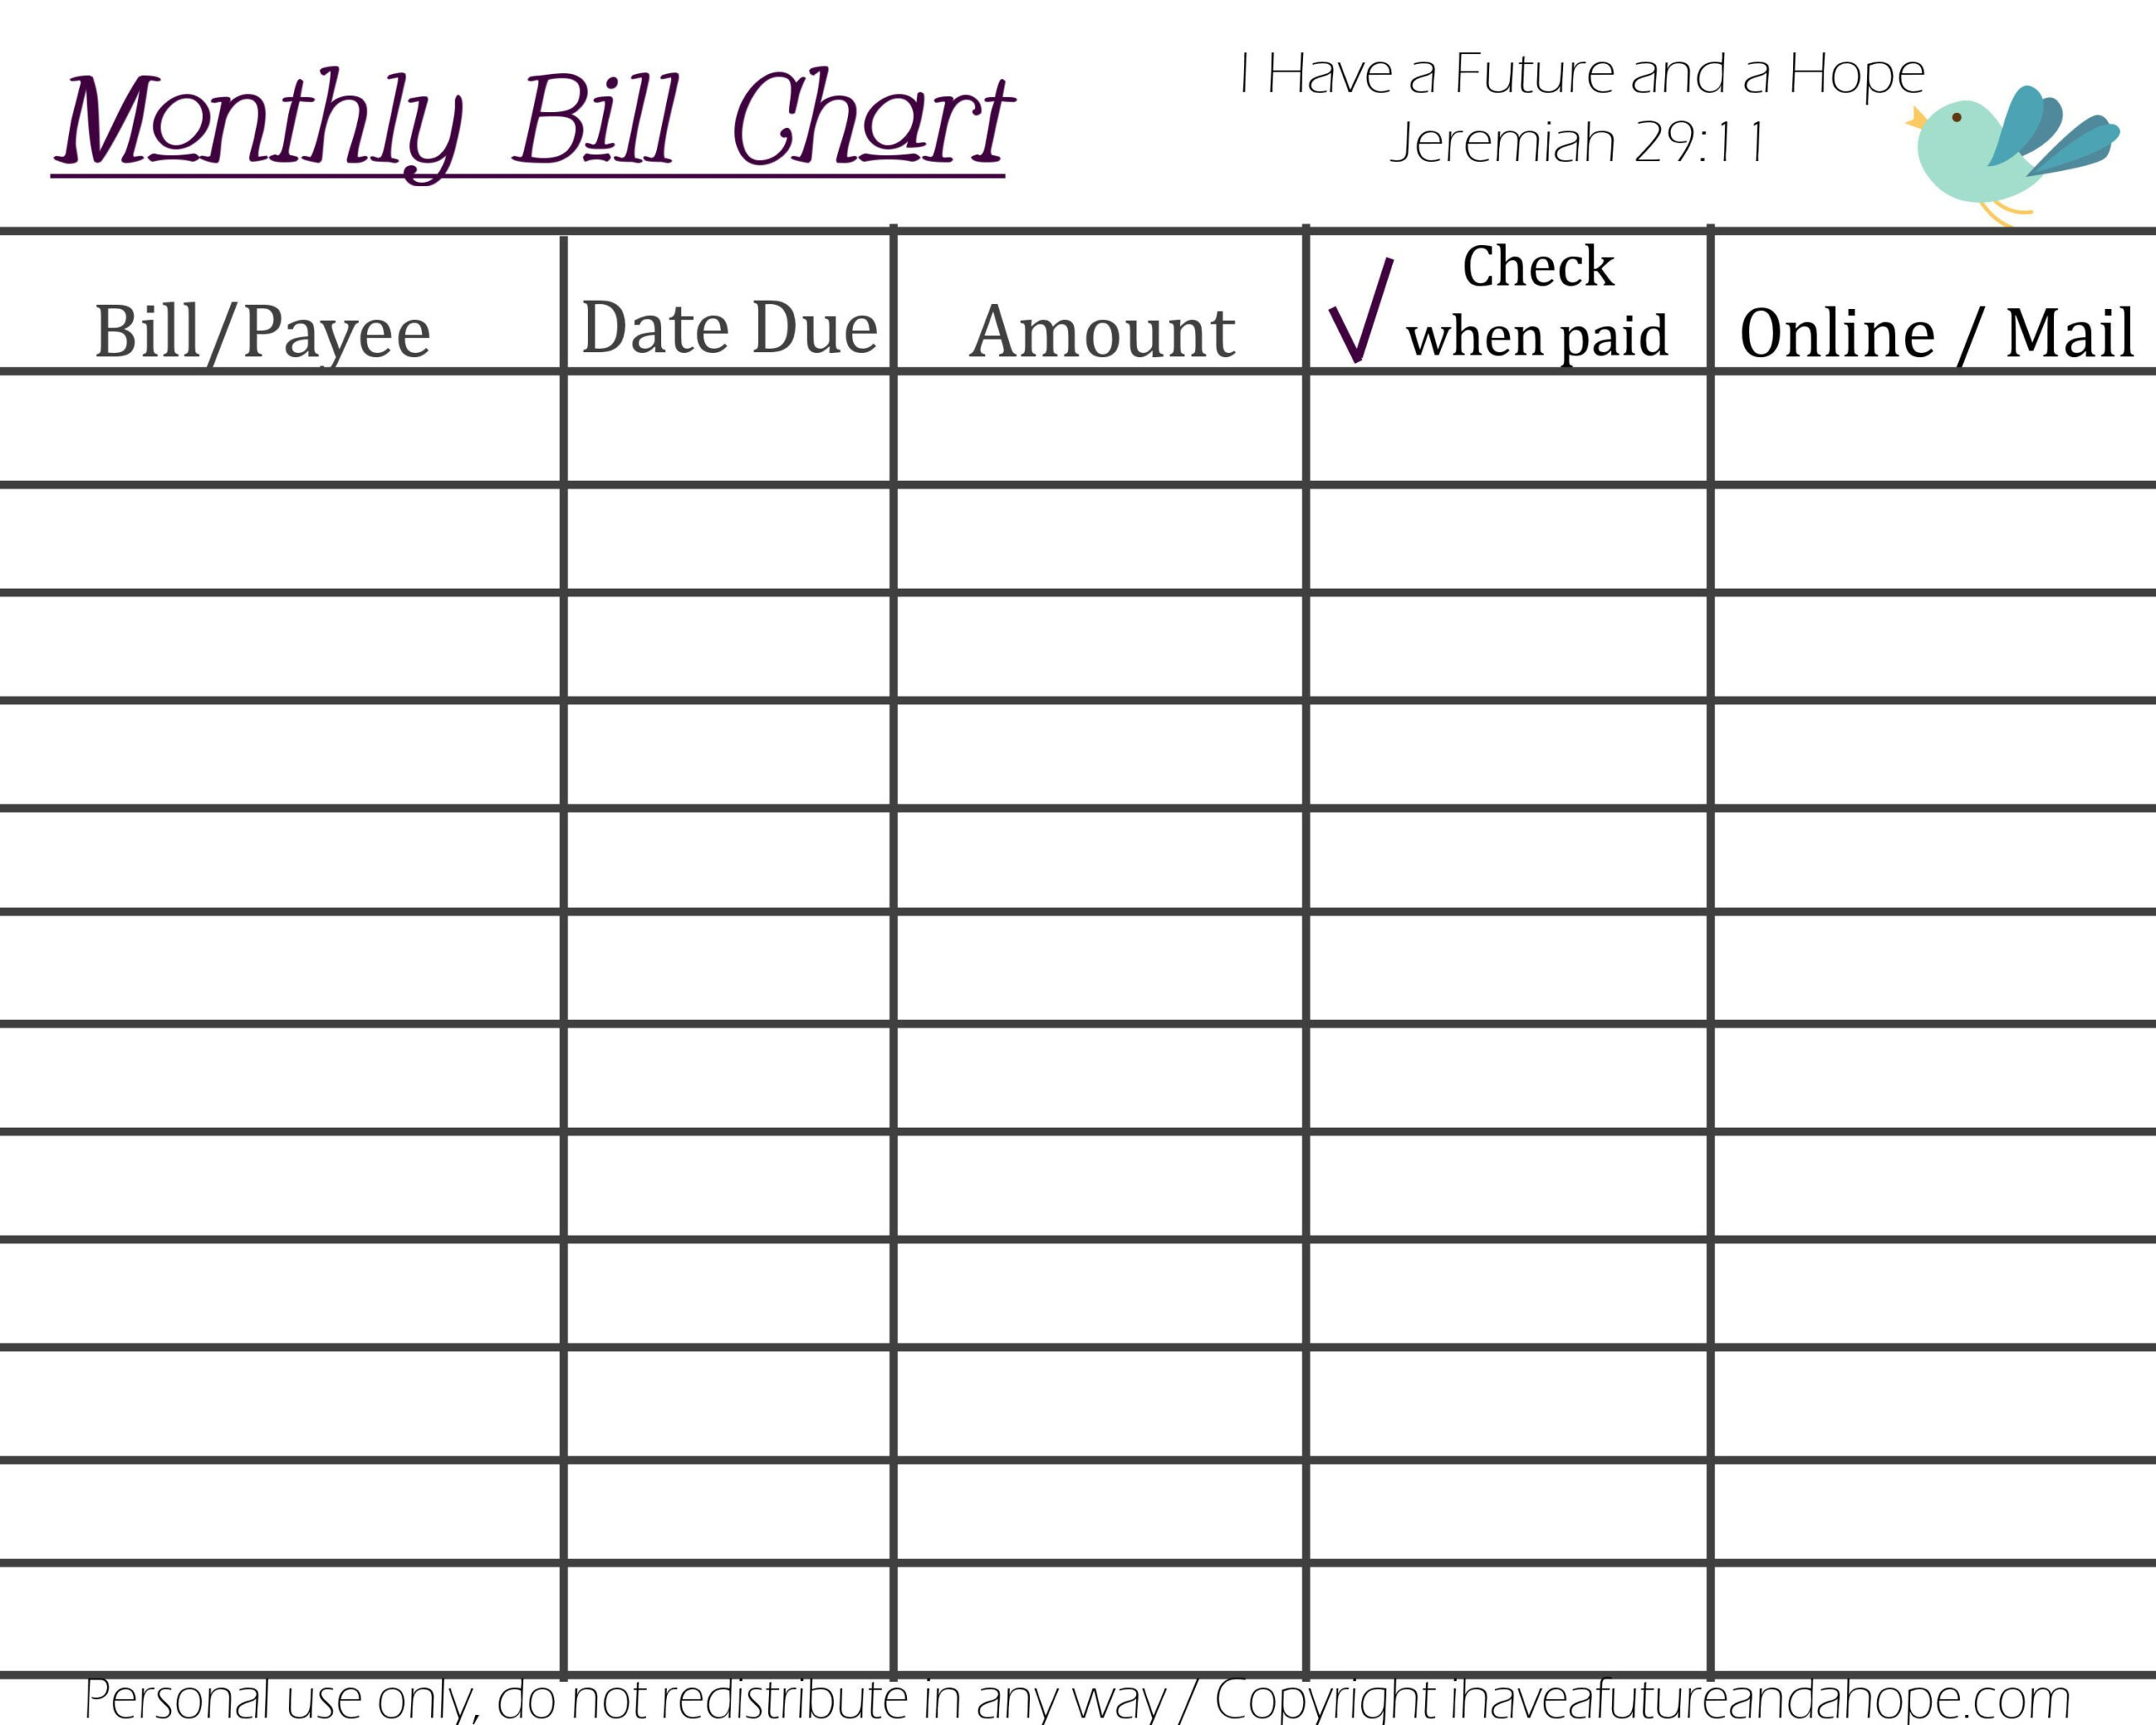 Printable Monthly Bill Chart | Paying Bills, Budget with regard to Free Printable Bill Chart